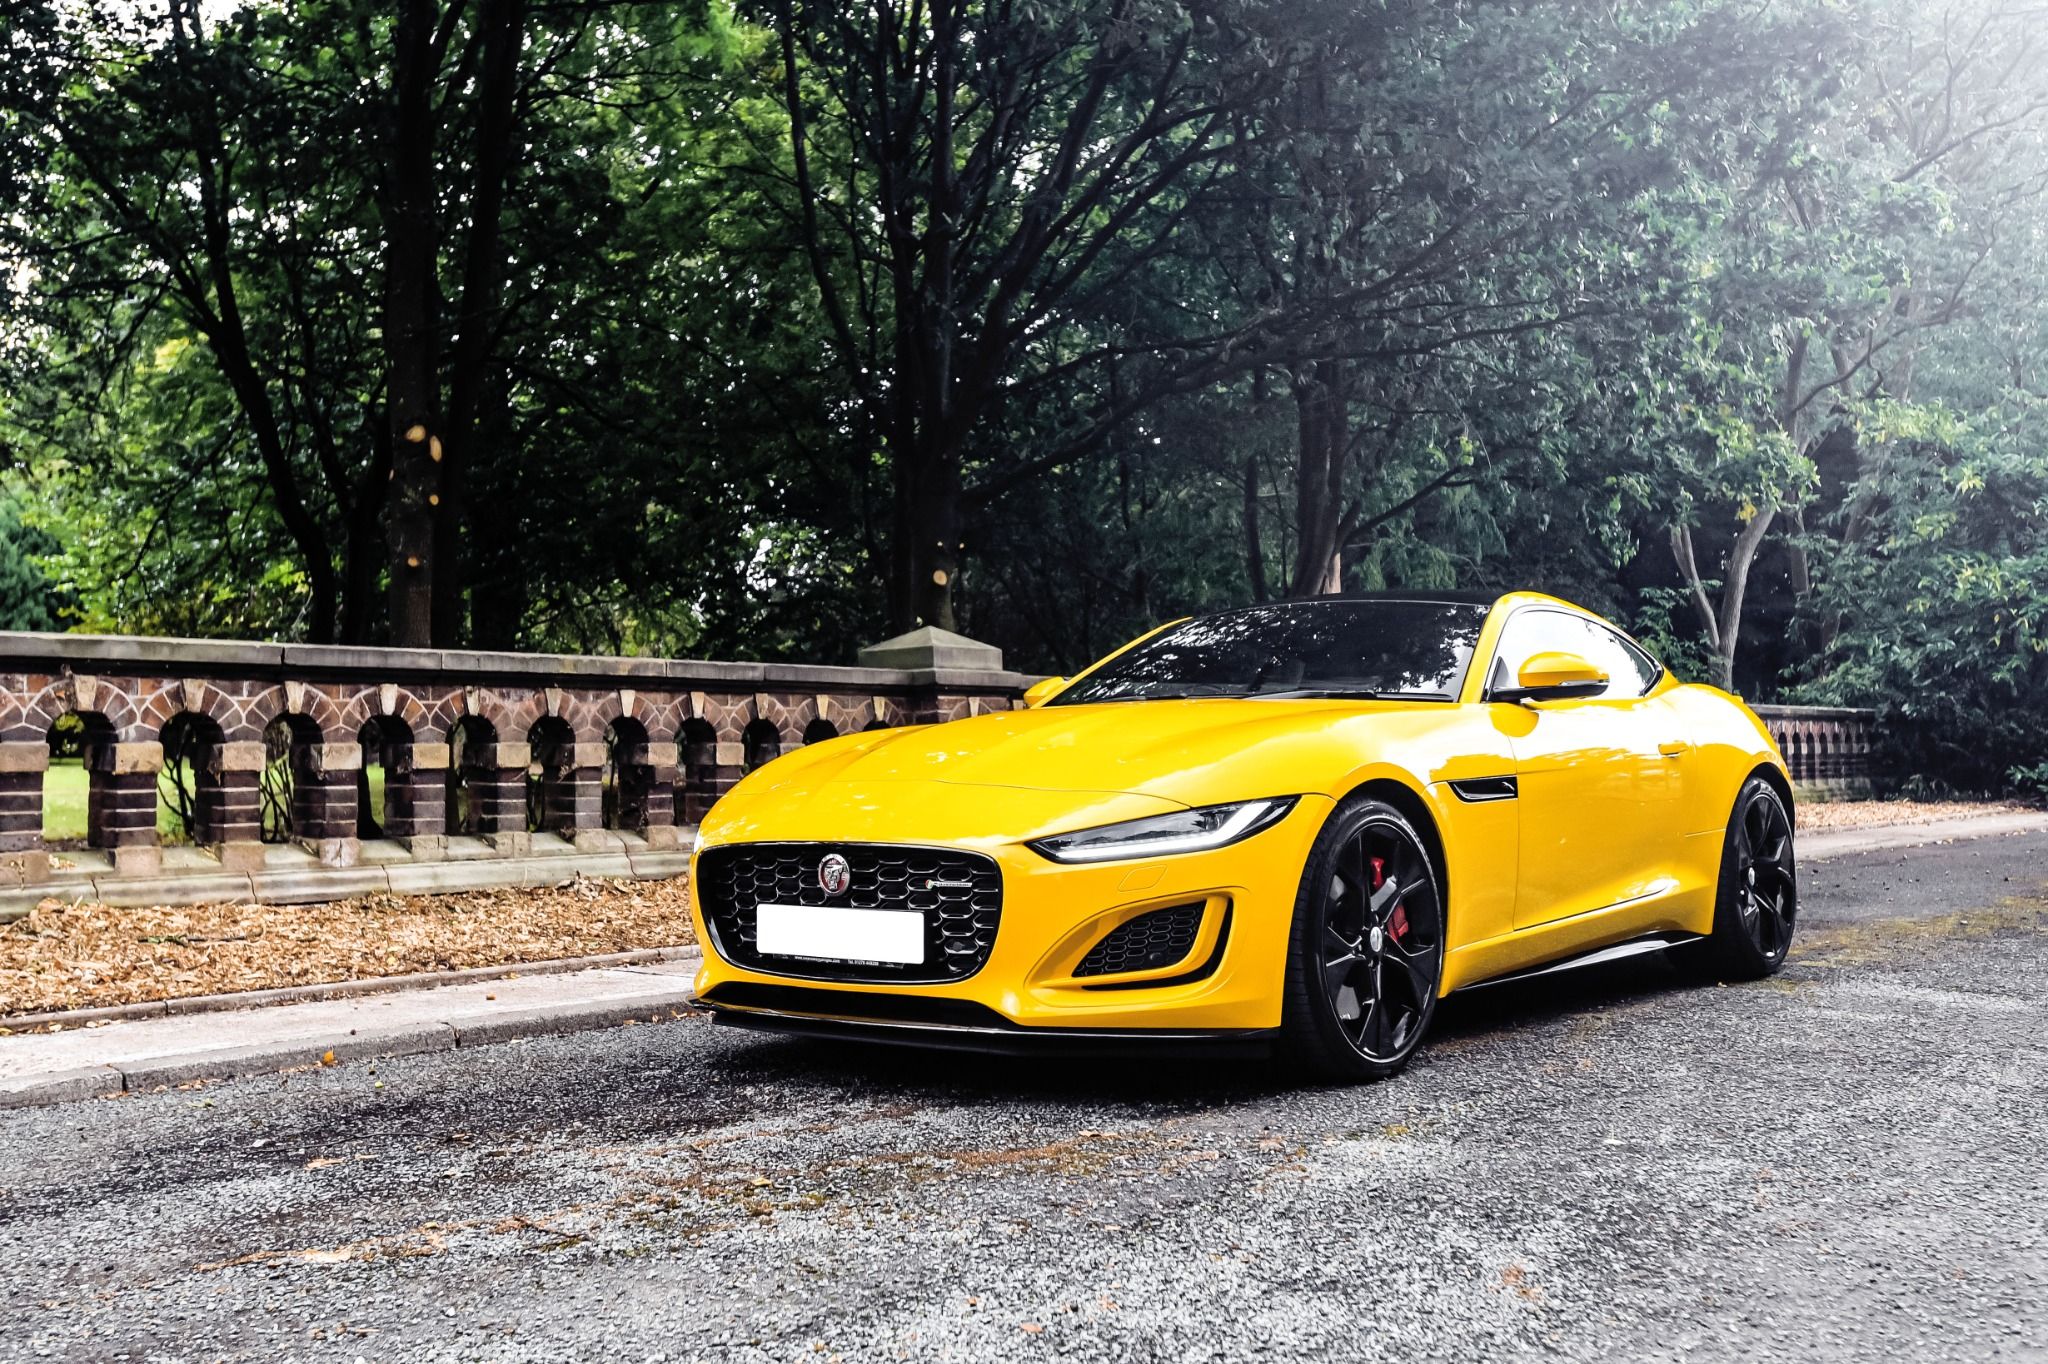 Yellow Jaguar F-Type Parked Next To Trees